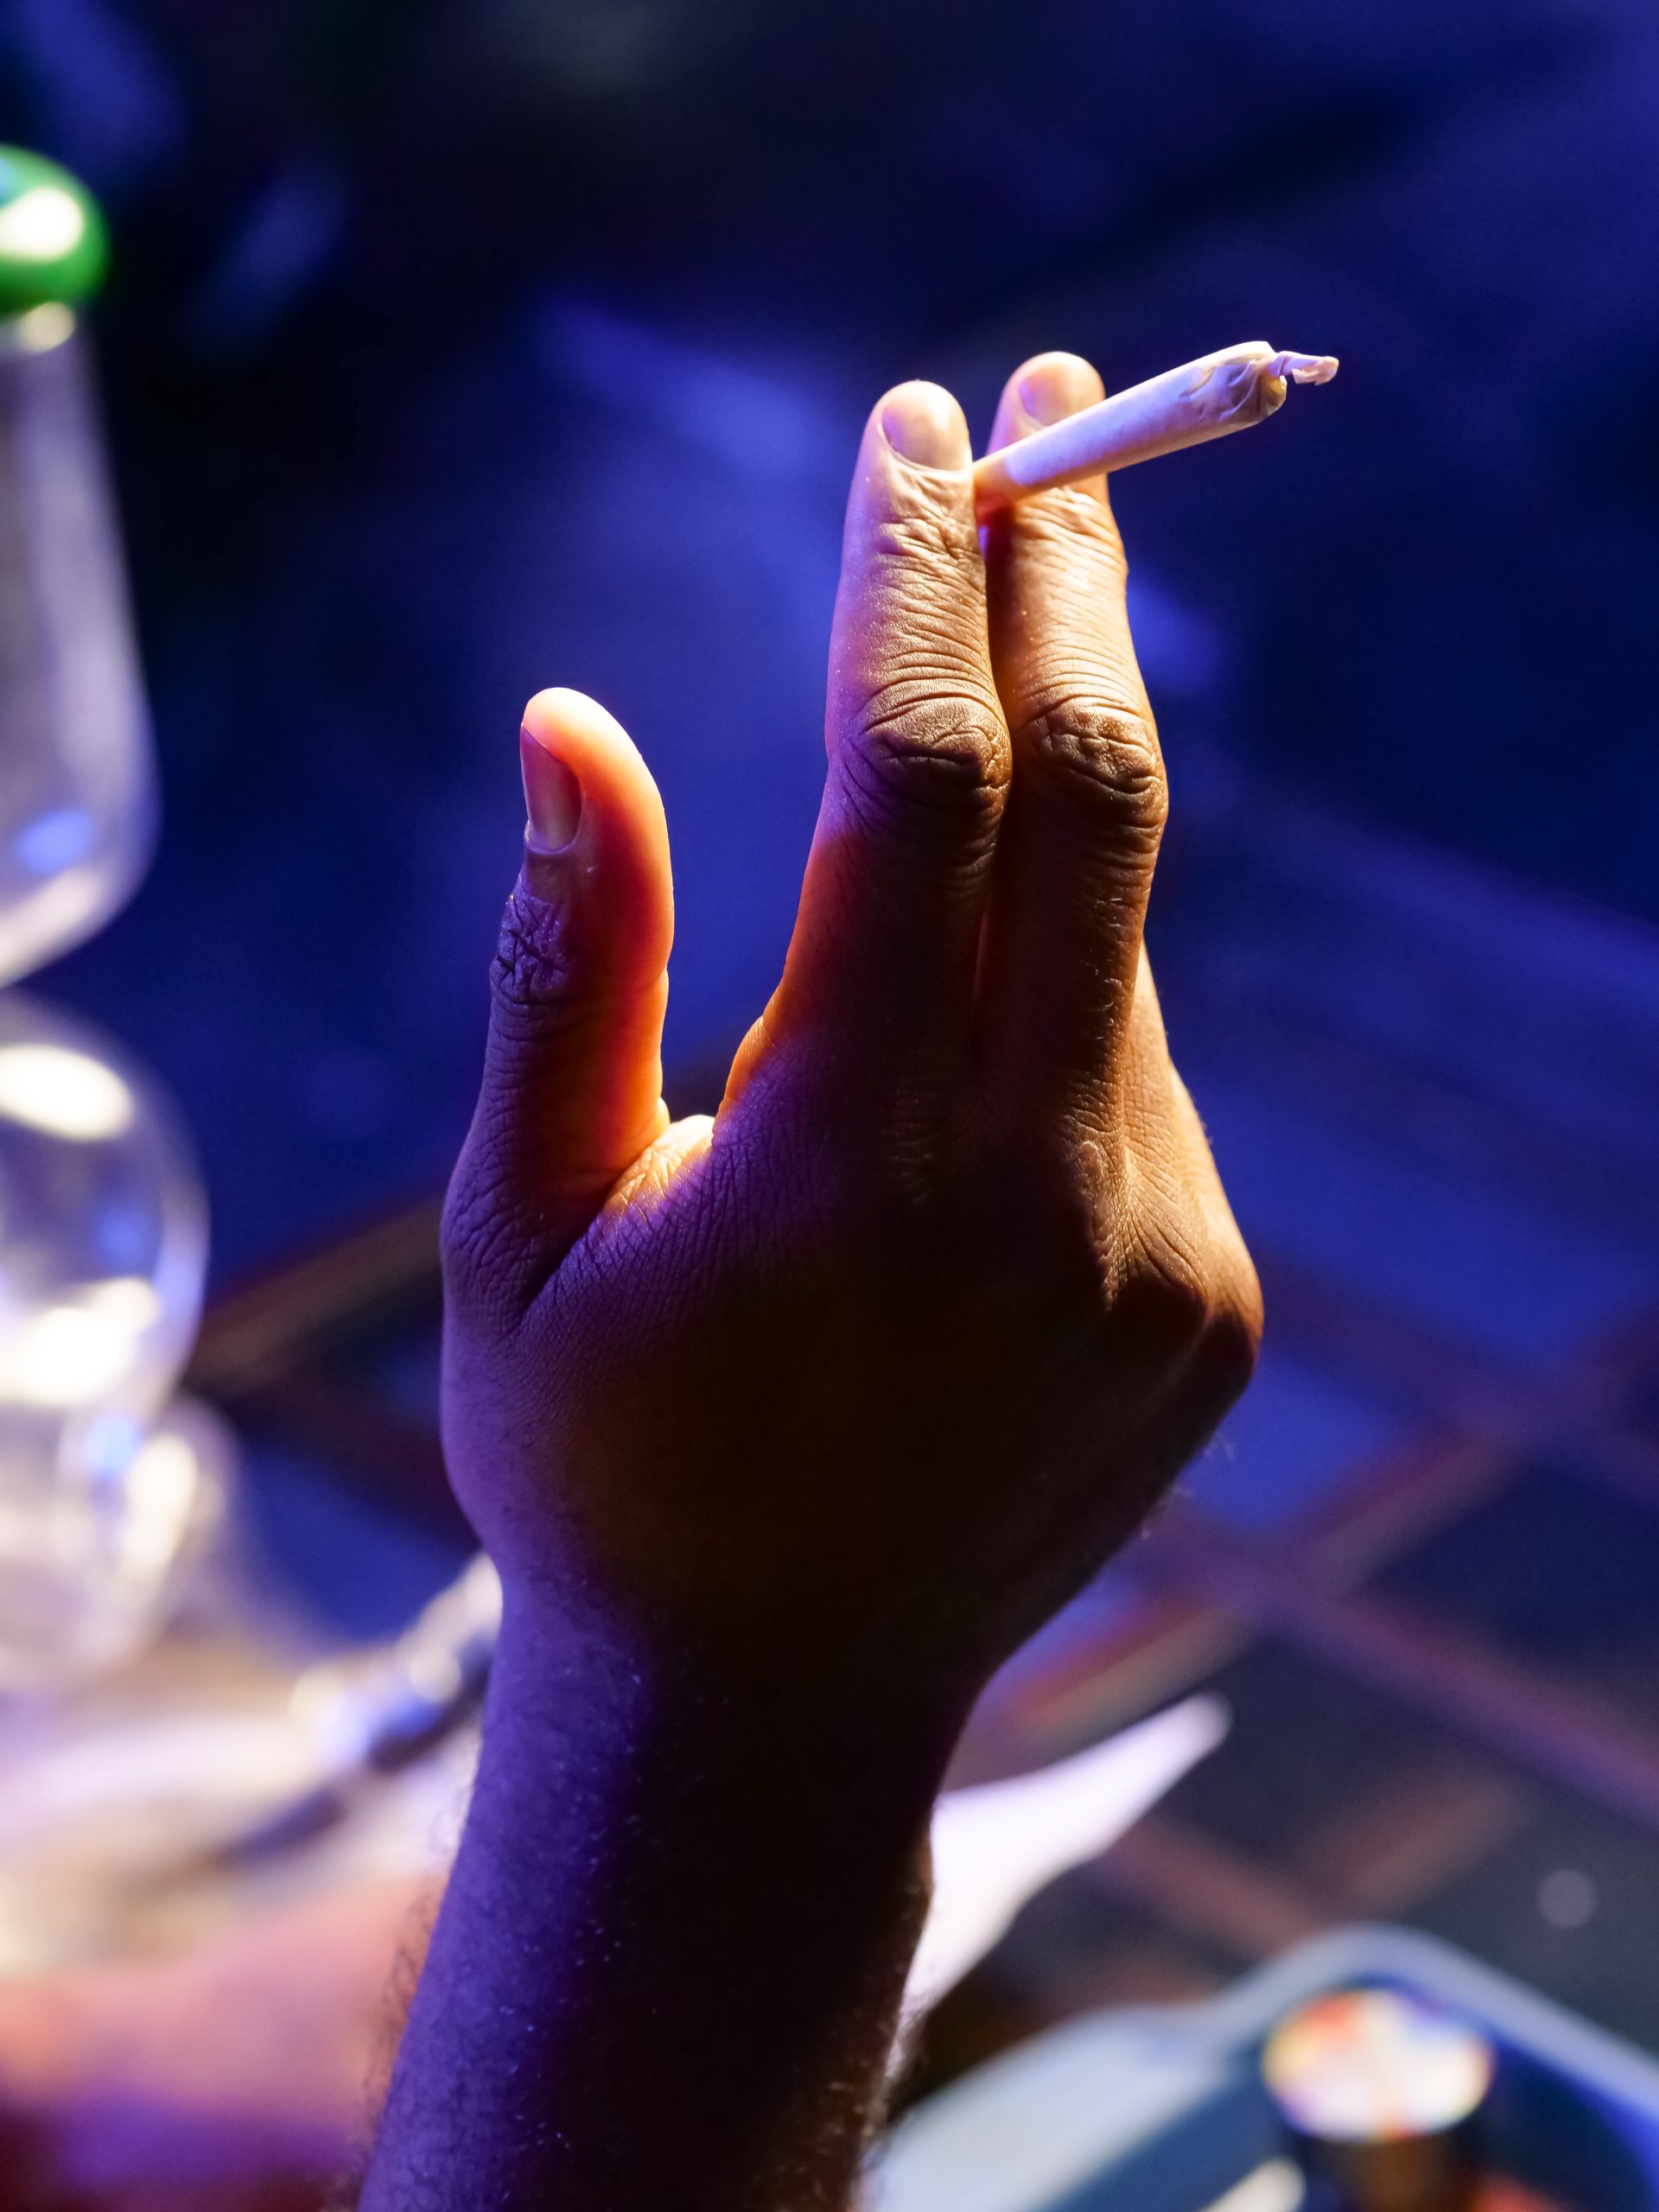 Photo of person holding blunt made of weed